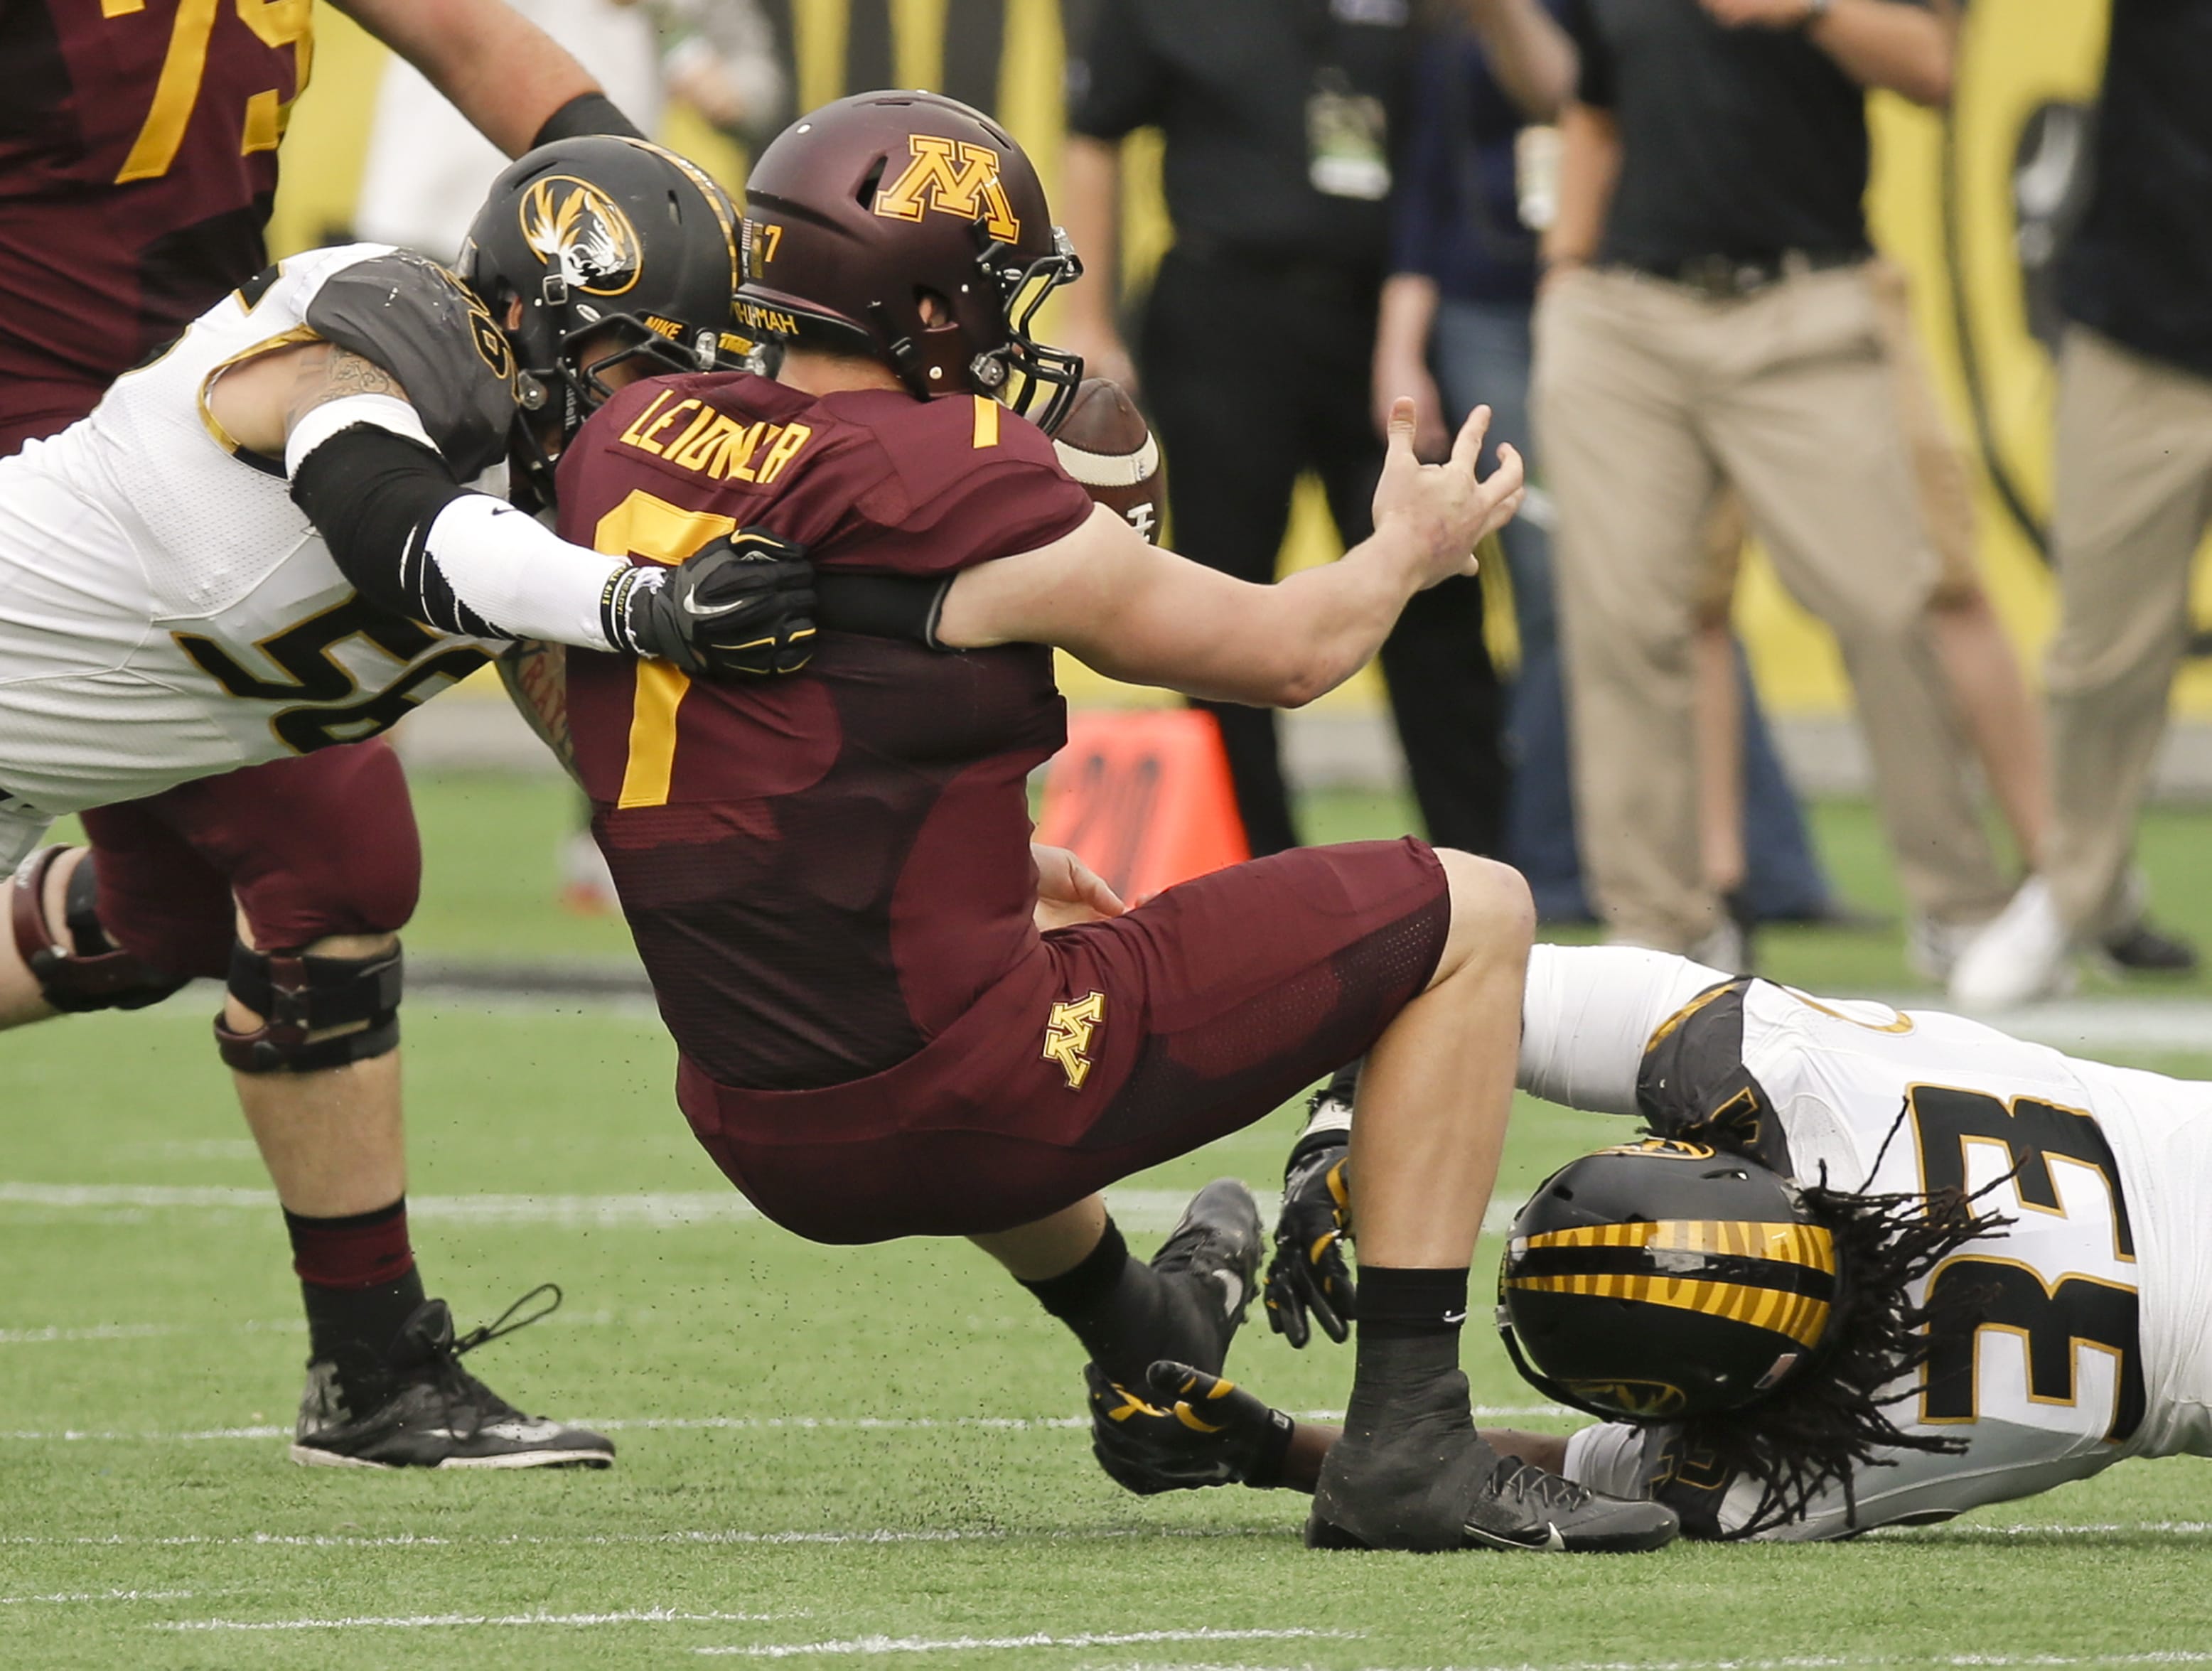 Minnesota quarterback Mitch Leidner (7) fumbles the ball as he is tackled by Missouri's Shane Ray, left, and Markus Golden (33) during the first half Thursday of the Citrus Bowl.